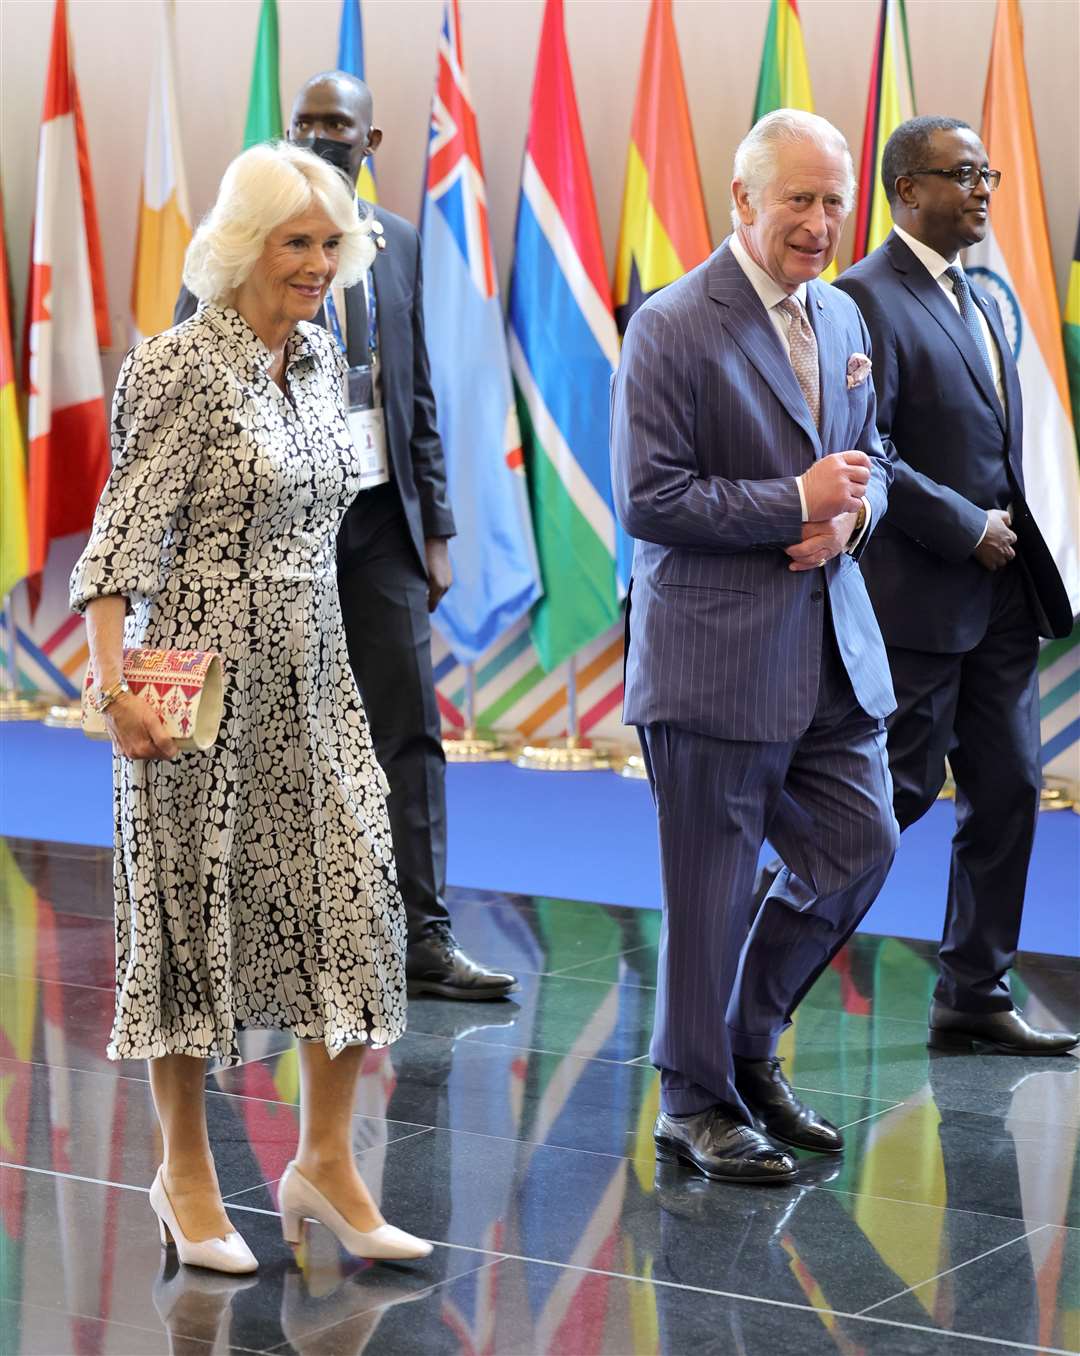 The then-Prince of Wales and Duchess of Cornwall at the Commonwealth Heads of Government Meeting opening ceremony in Kigali, Rwanda (Chris Jackson/PA)